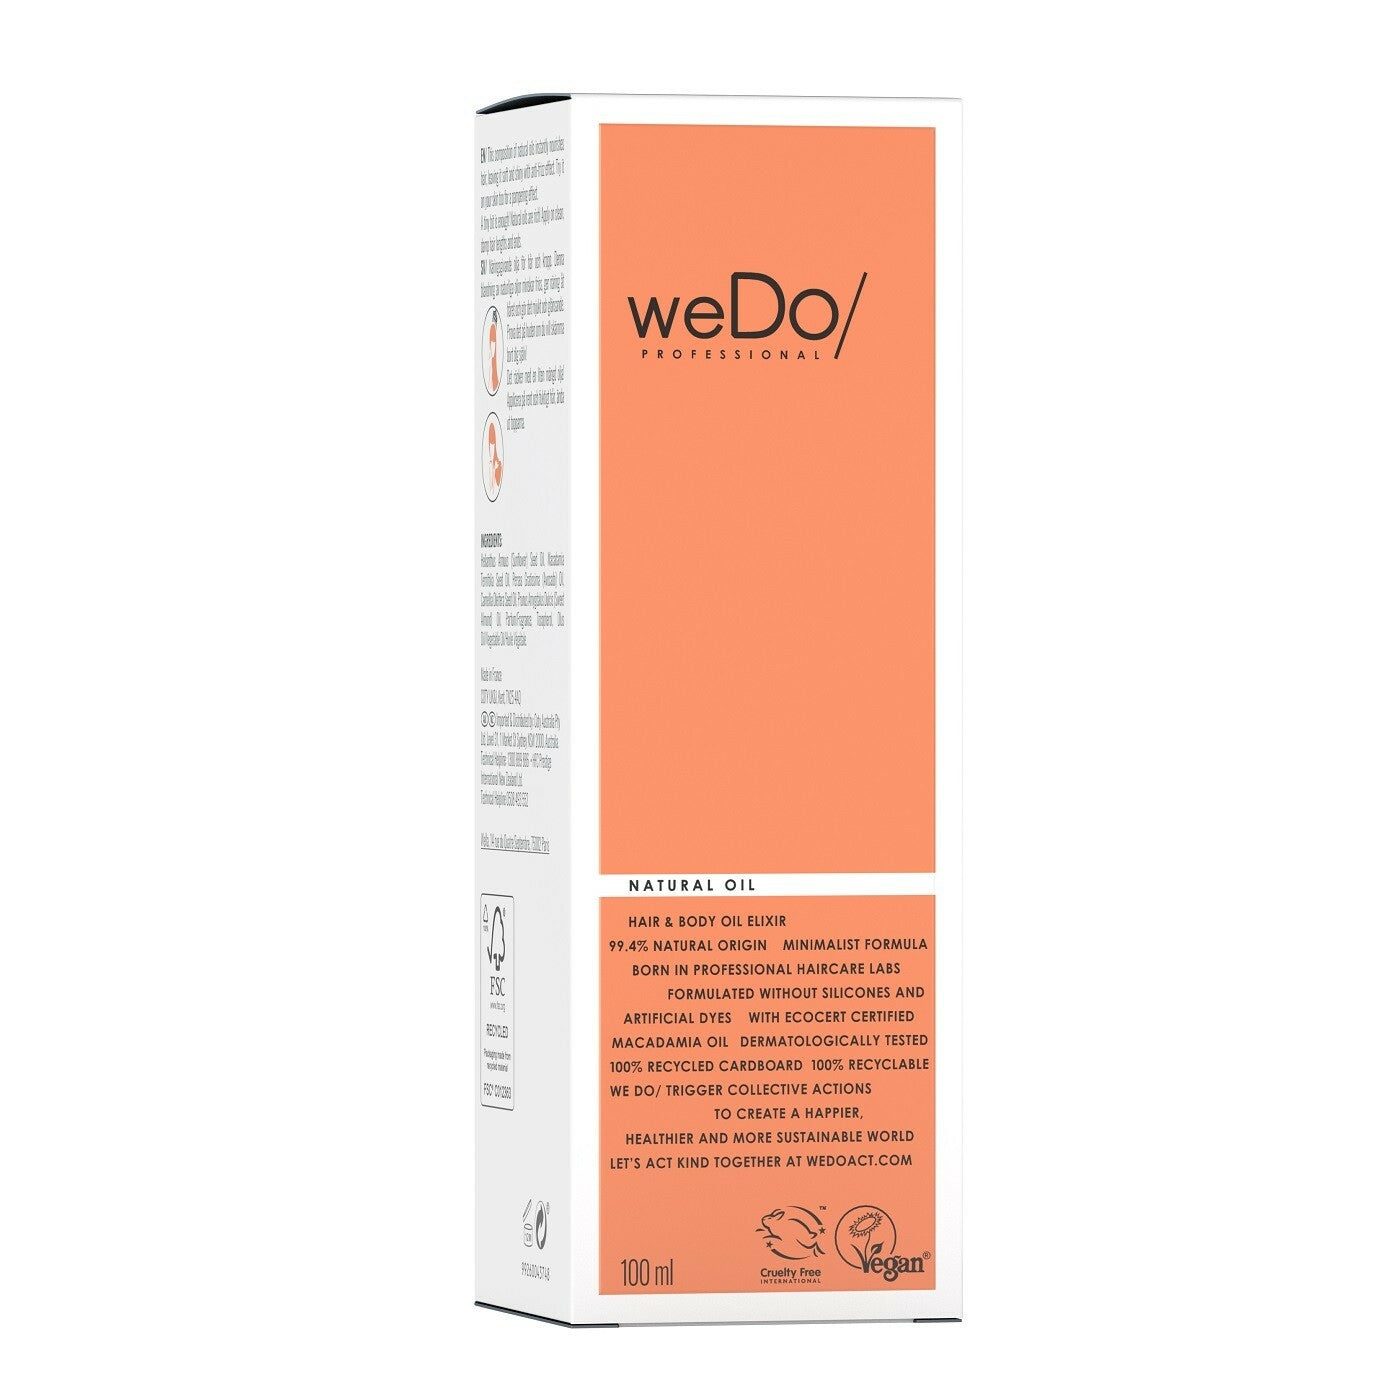 WeDo/Professional Natural Oil